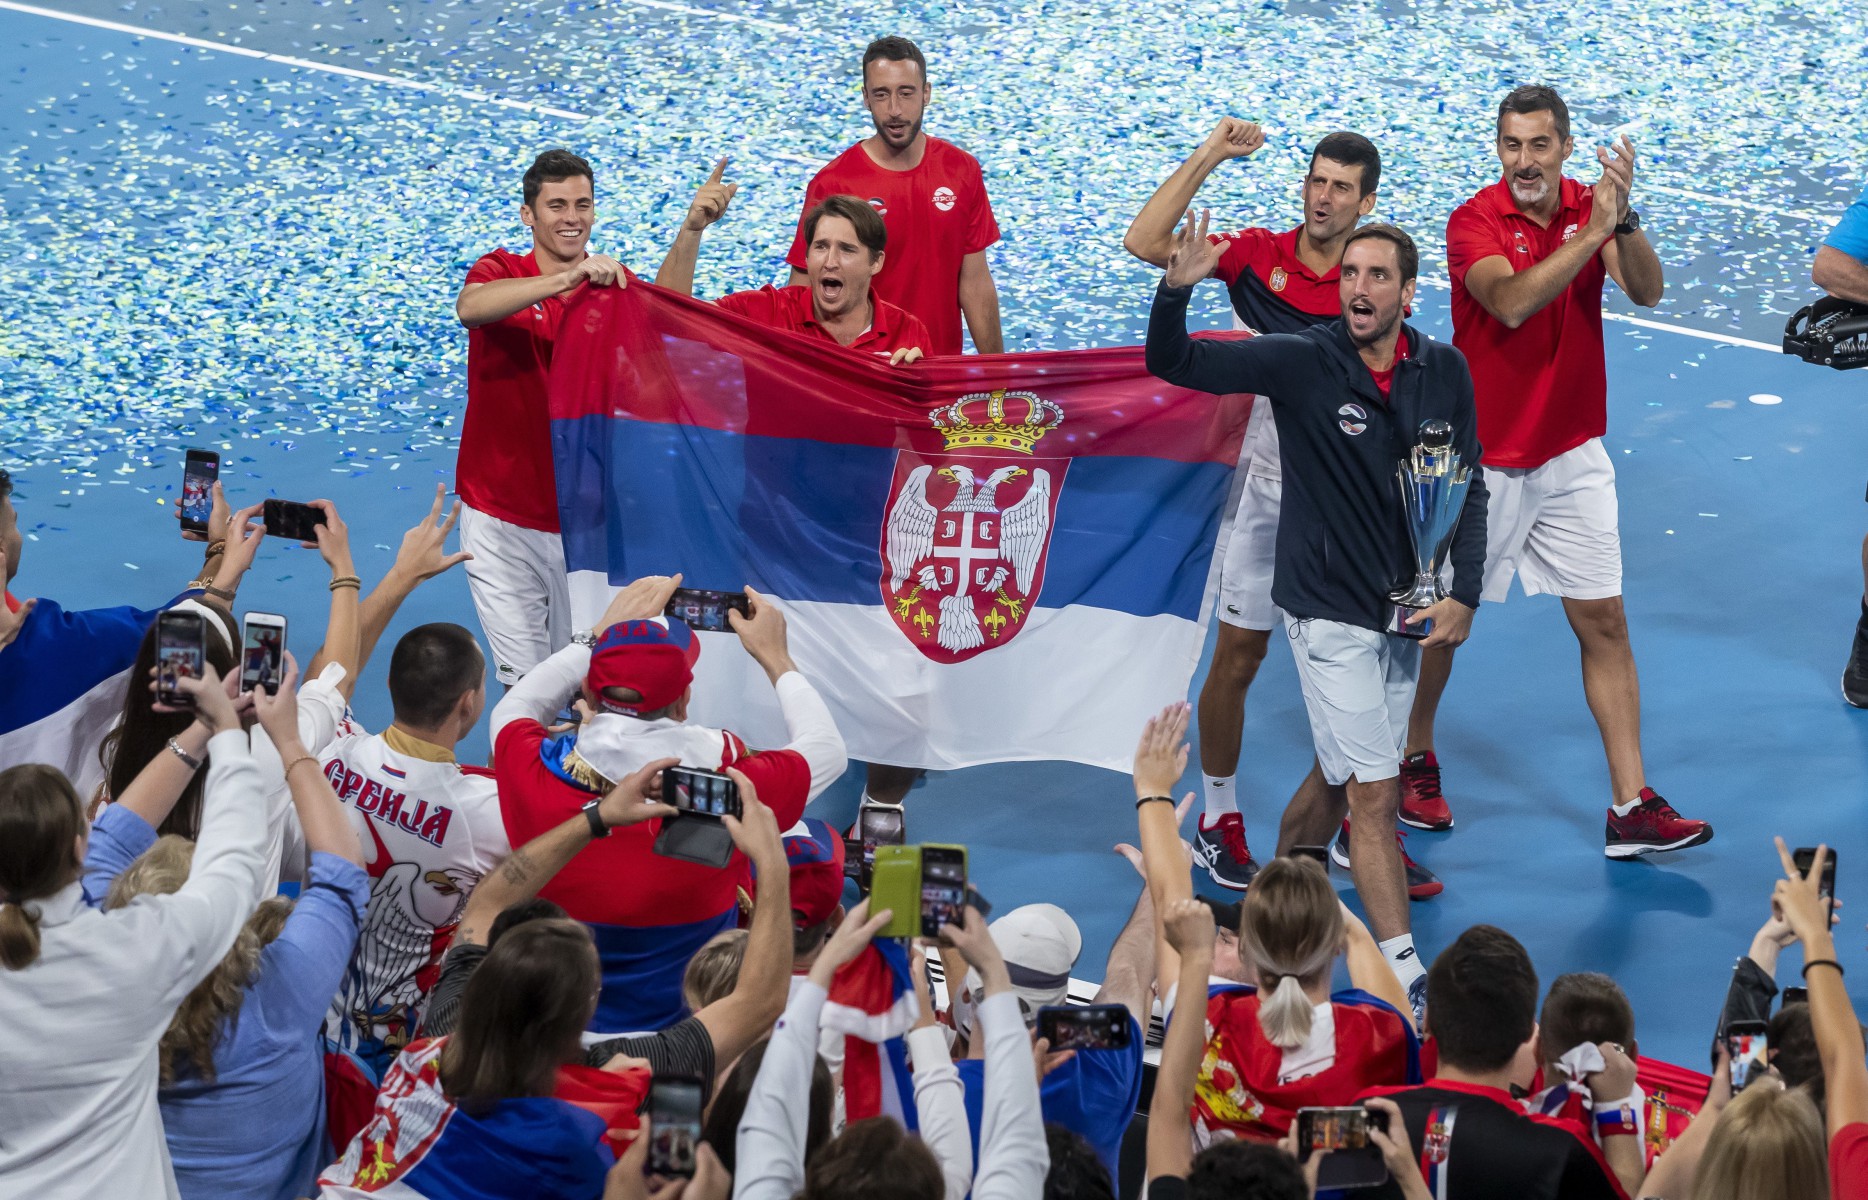 History is made as Serbia hail victory over Spain in the final at Sydney